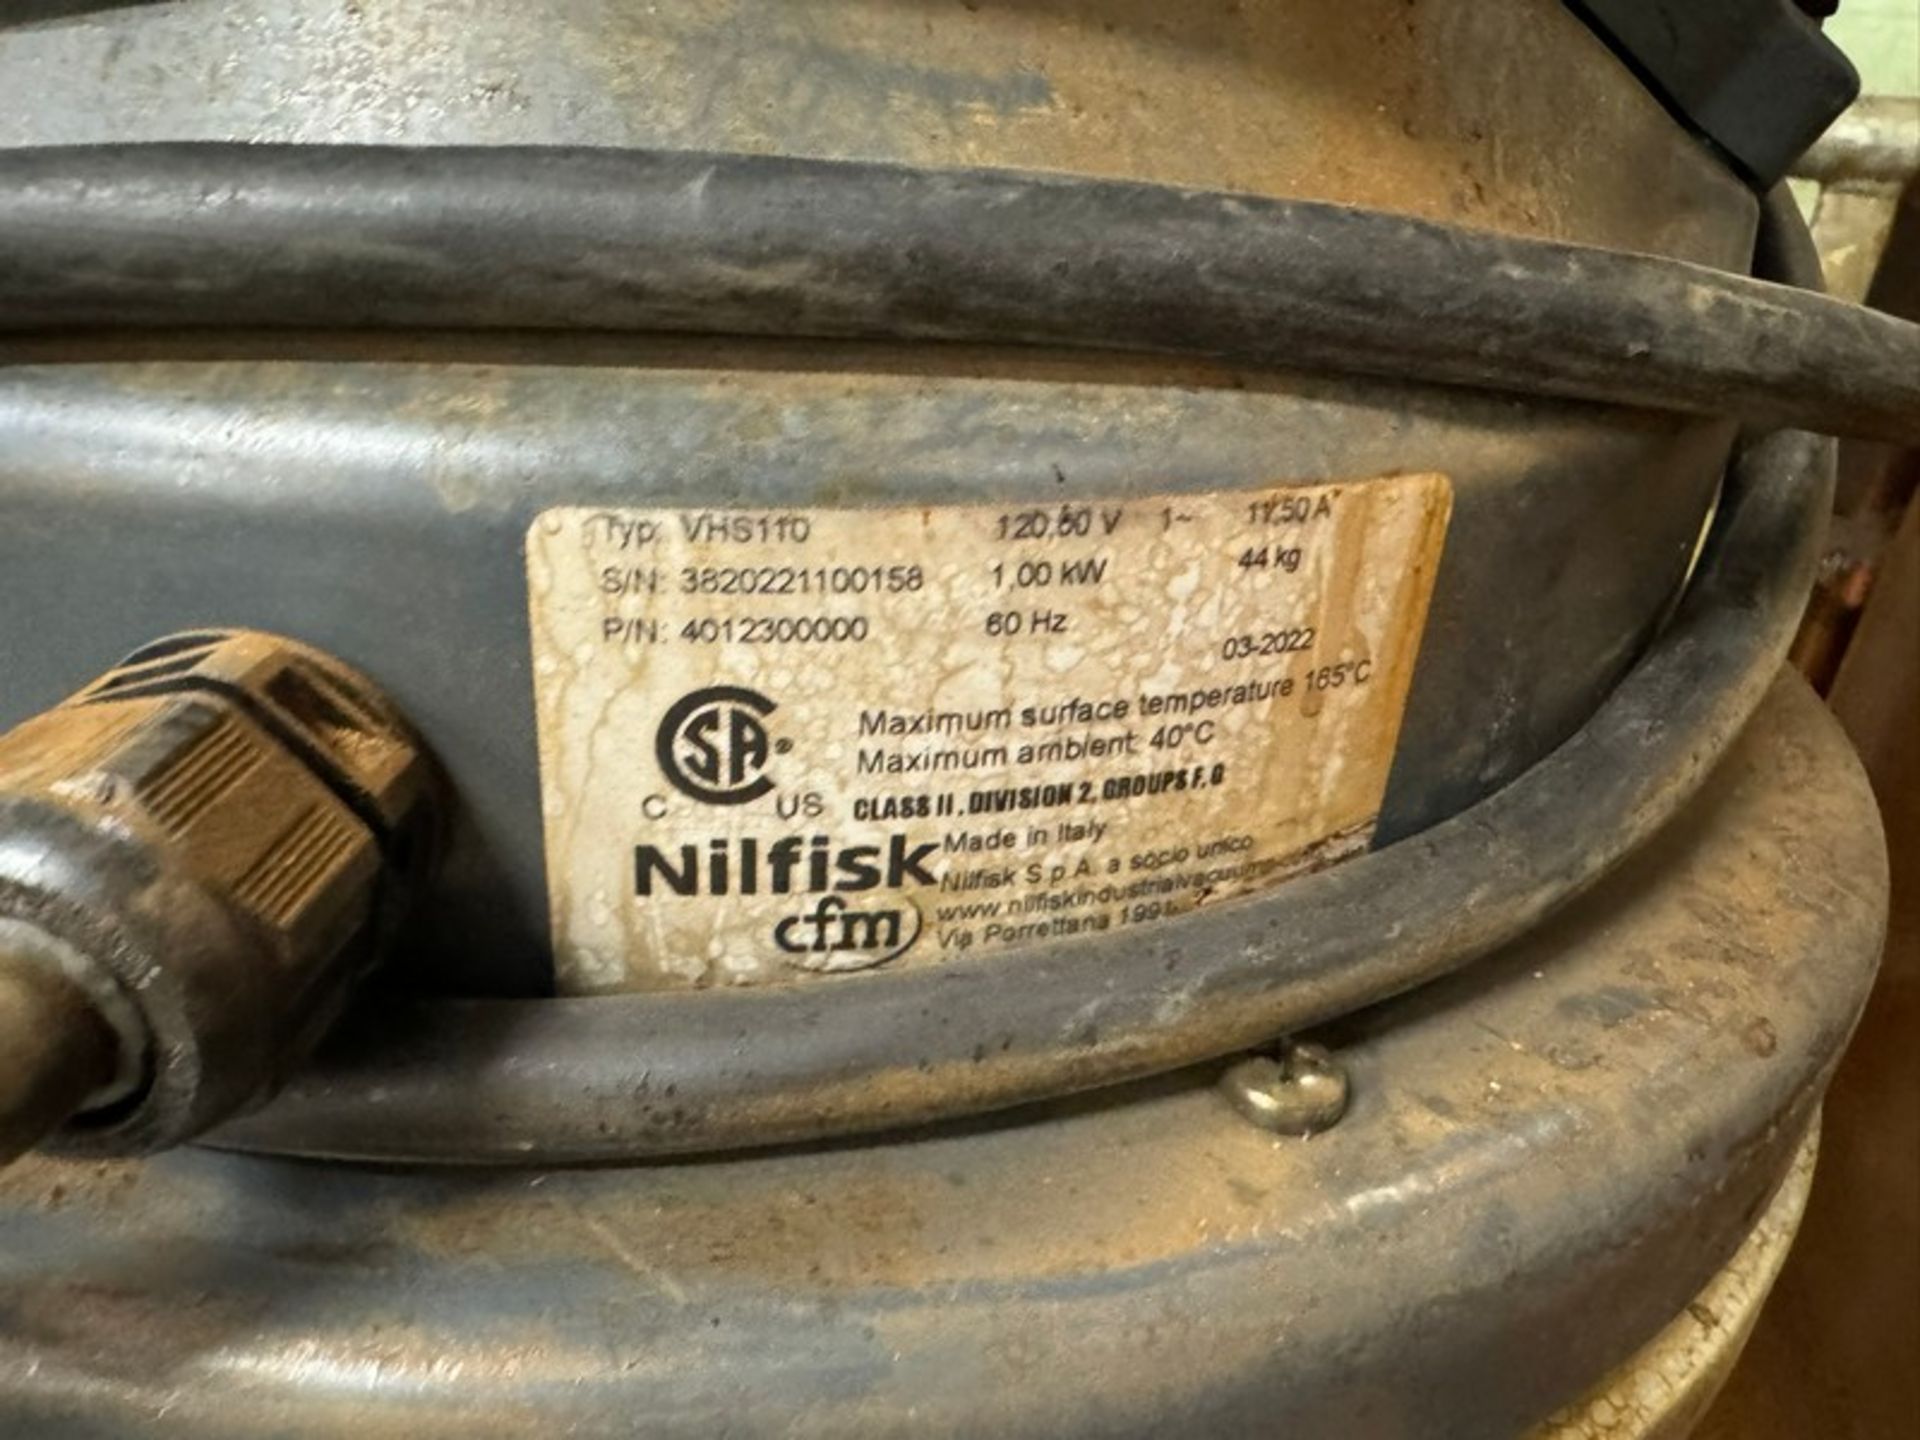 Nilfisk Portable Dust Collector, Type VHS11D, S/N 3820221100158, Mounted on Portable Frame ( - Image 3 of 4